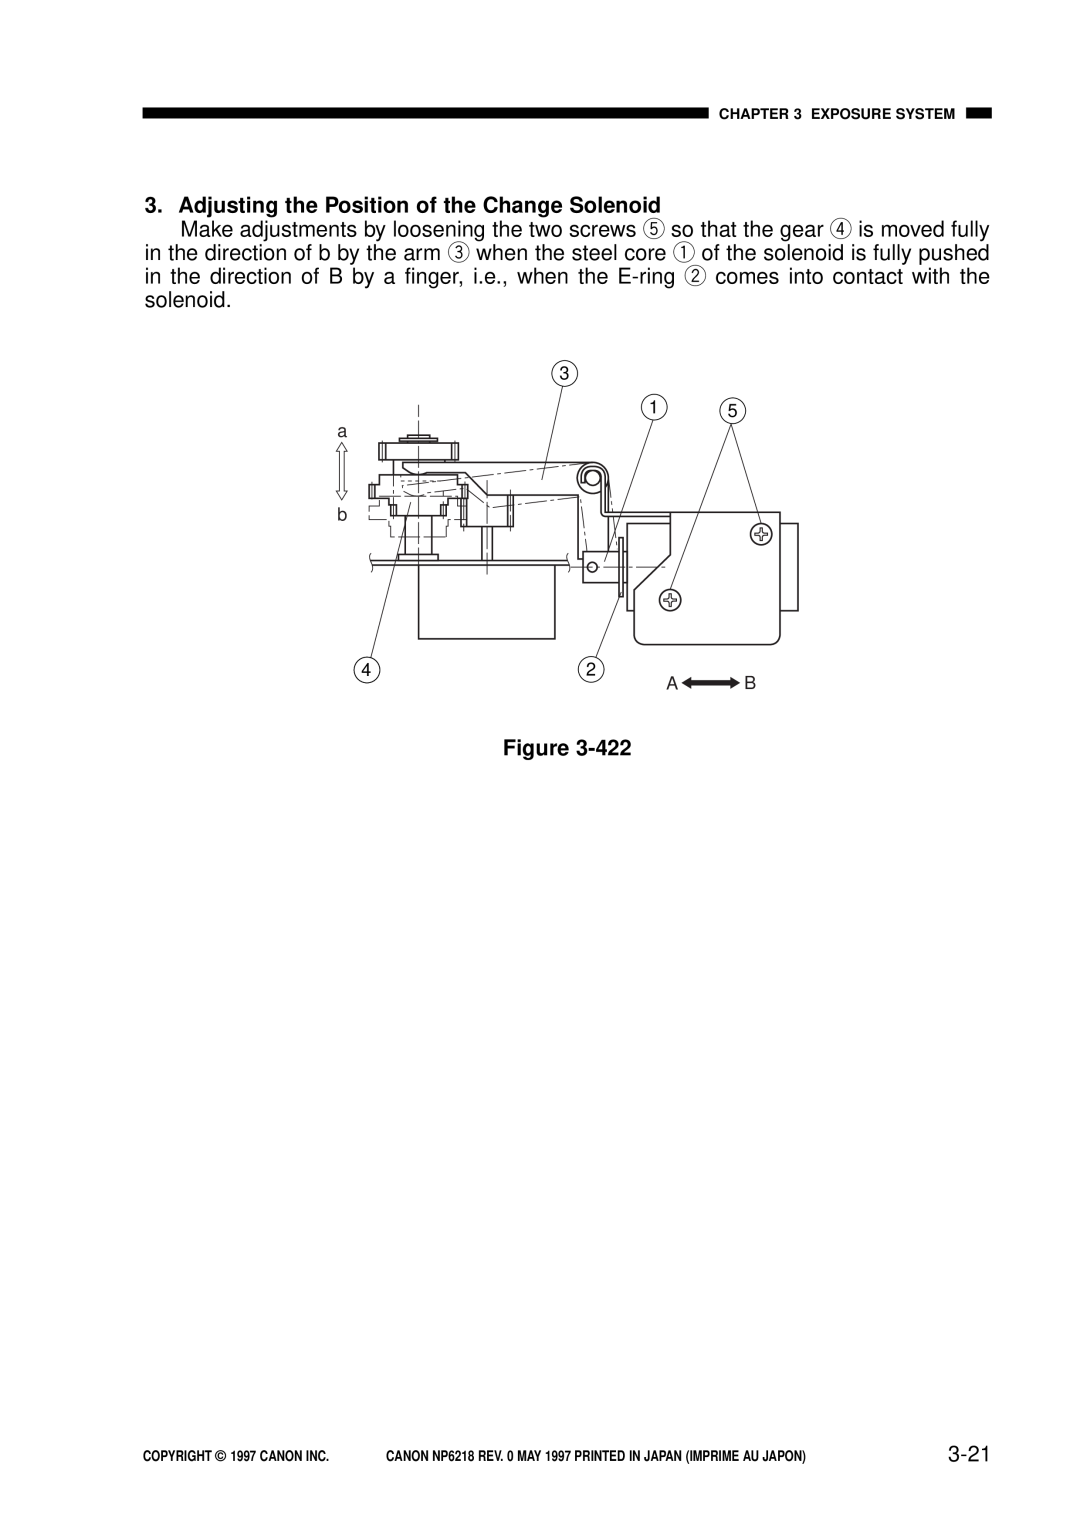 Canon NP6218, FY8-13EX-000 service manual Adjusting the Position of the Change Solenoid, 3-21, A B 